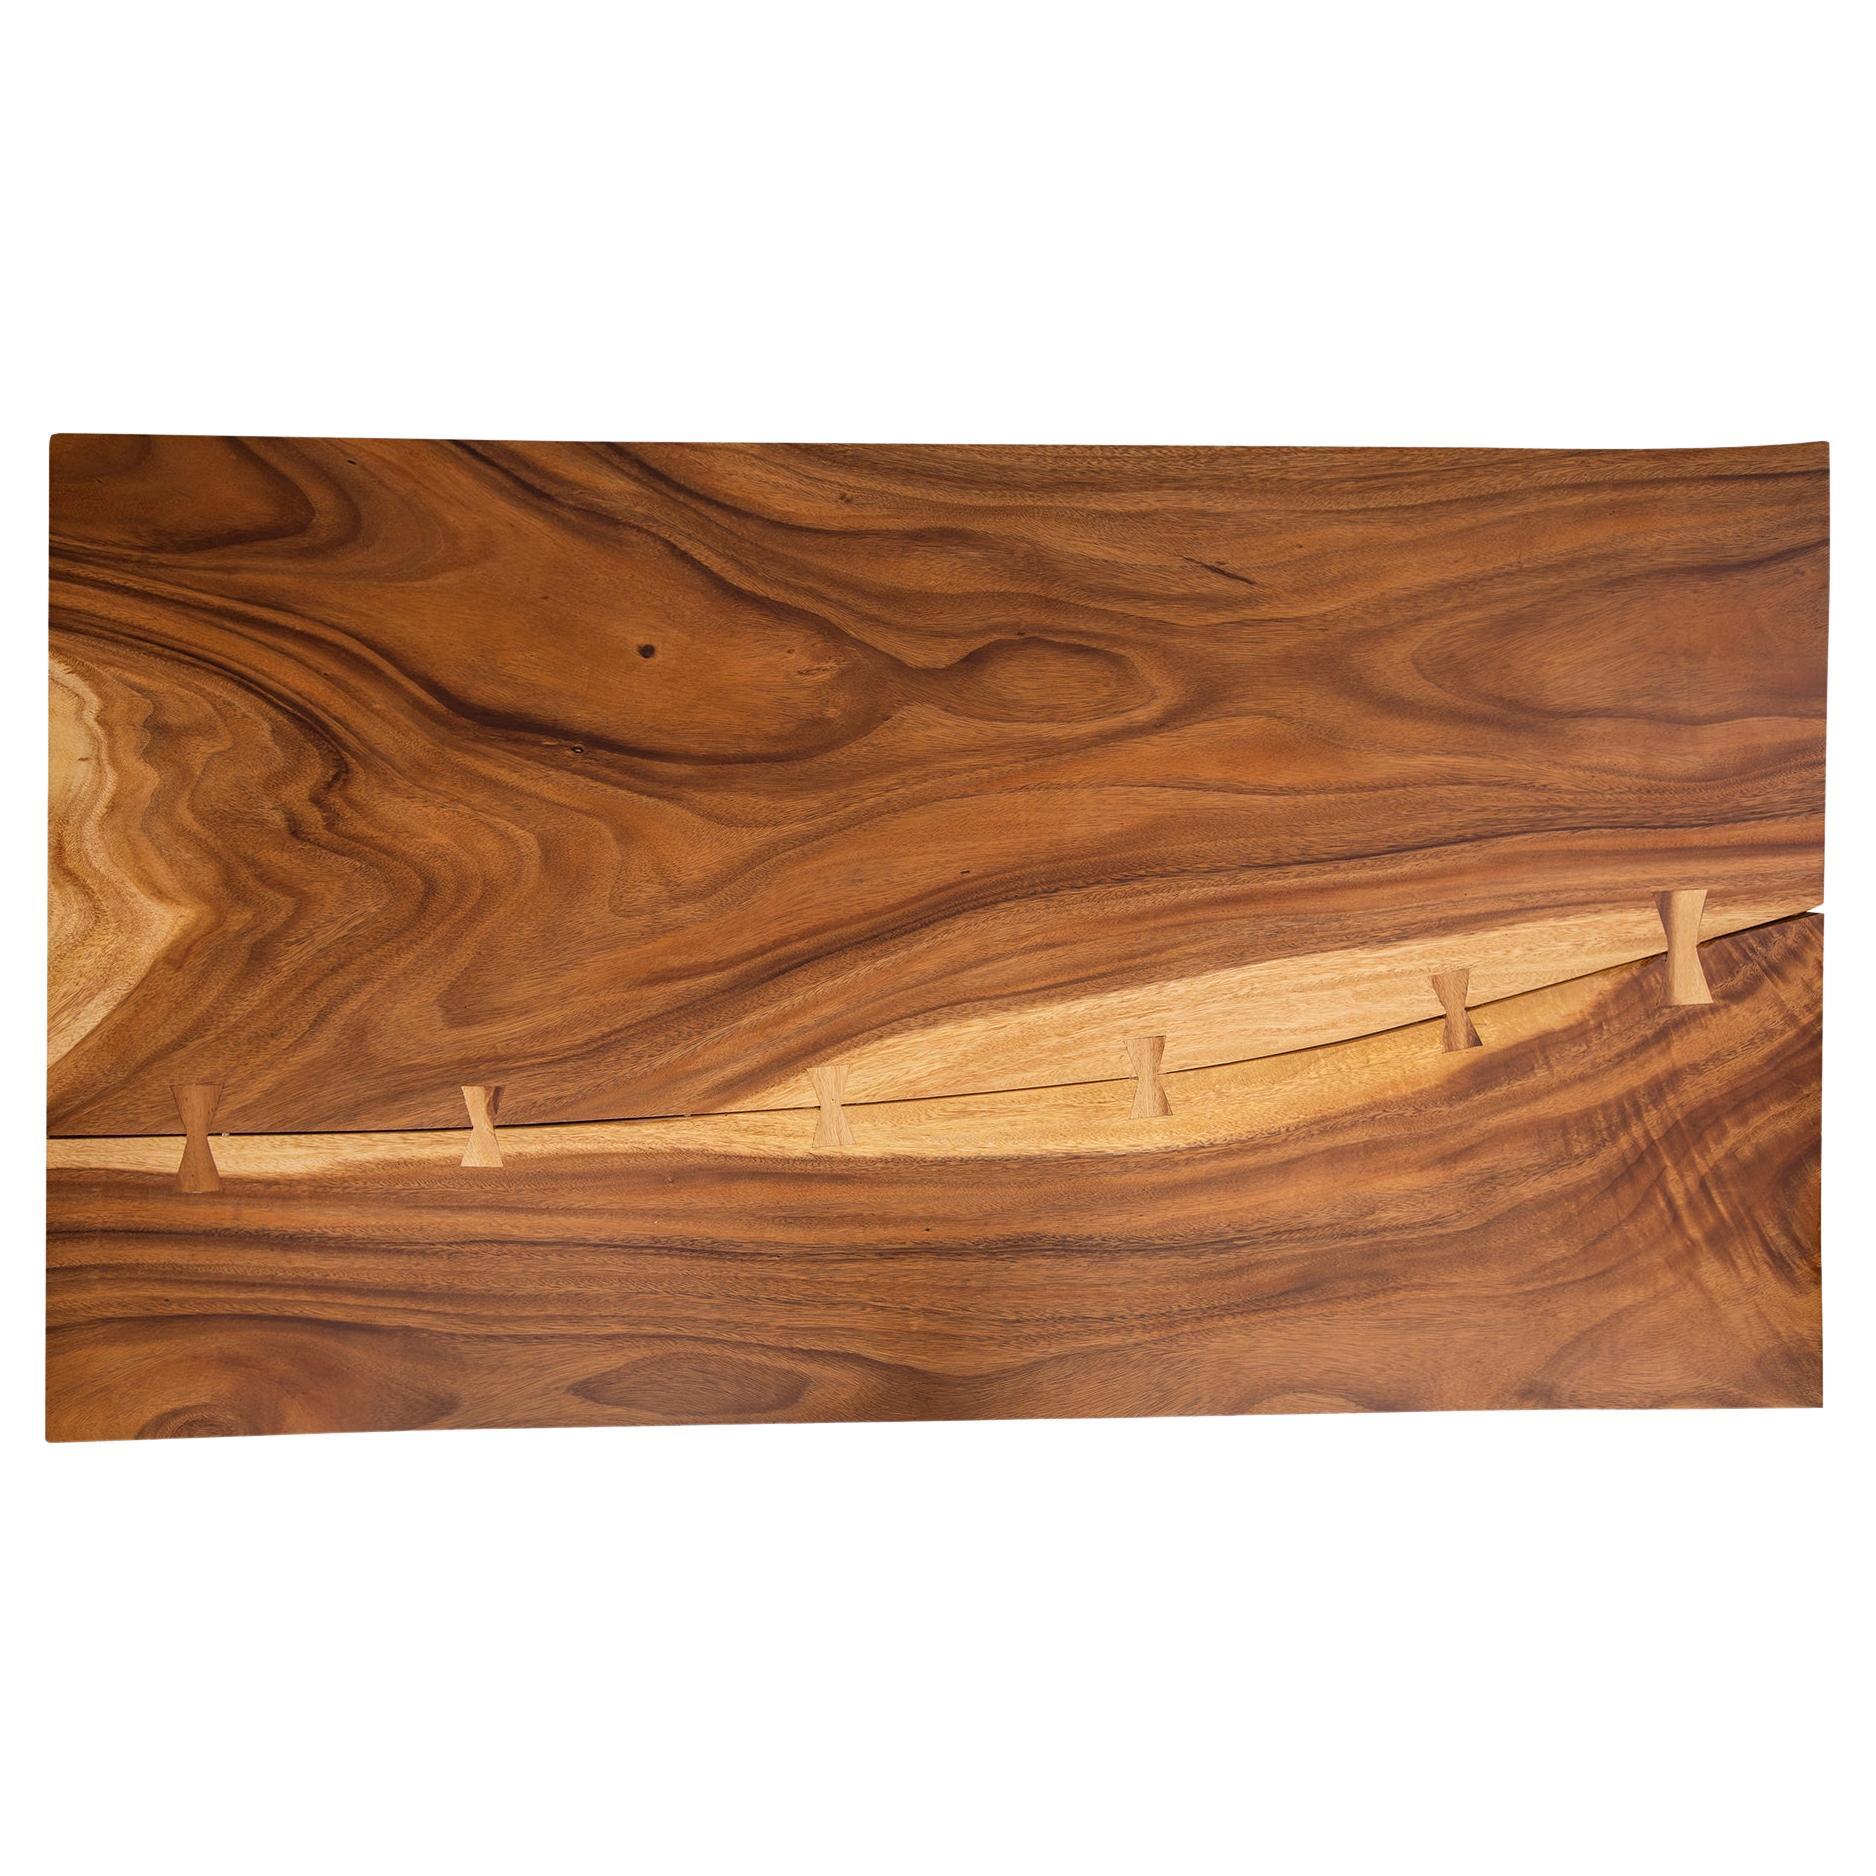 Acacia Mission Limited Edition Slab Table in Smooth Natural Acacia For Sale